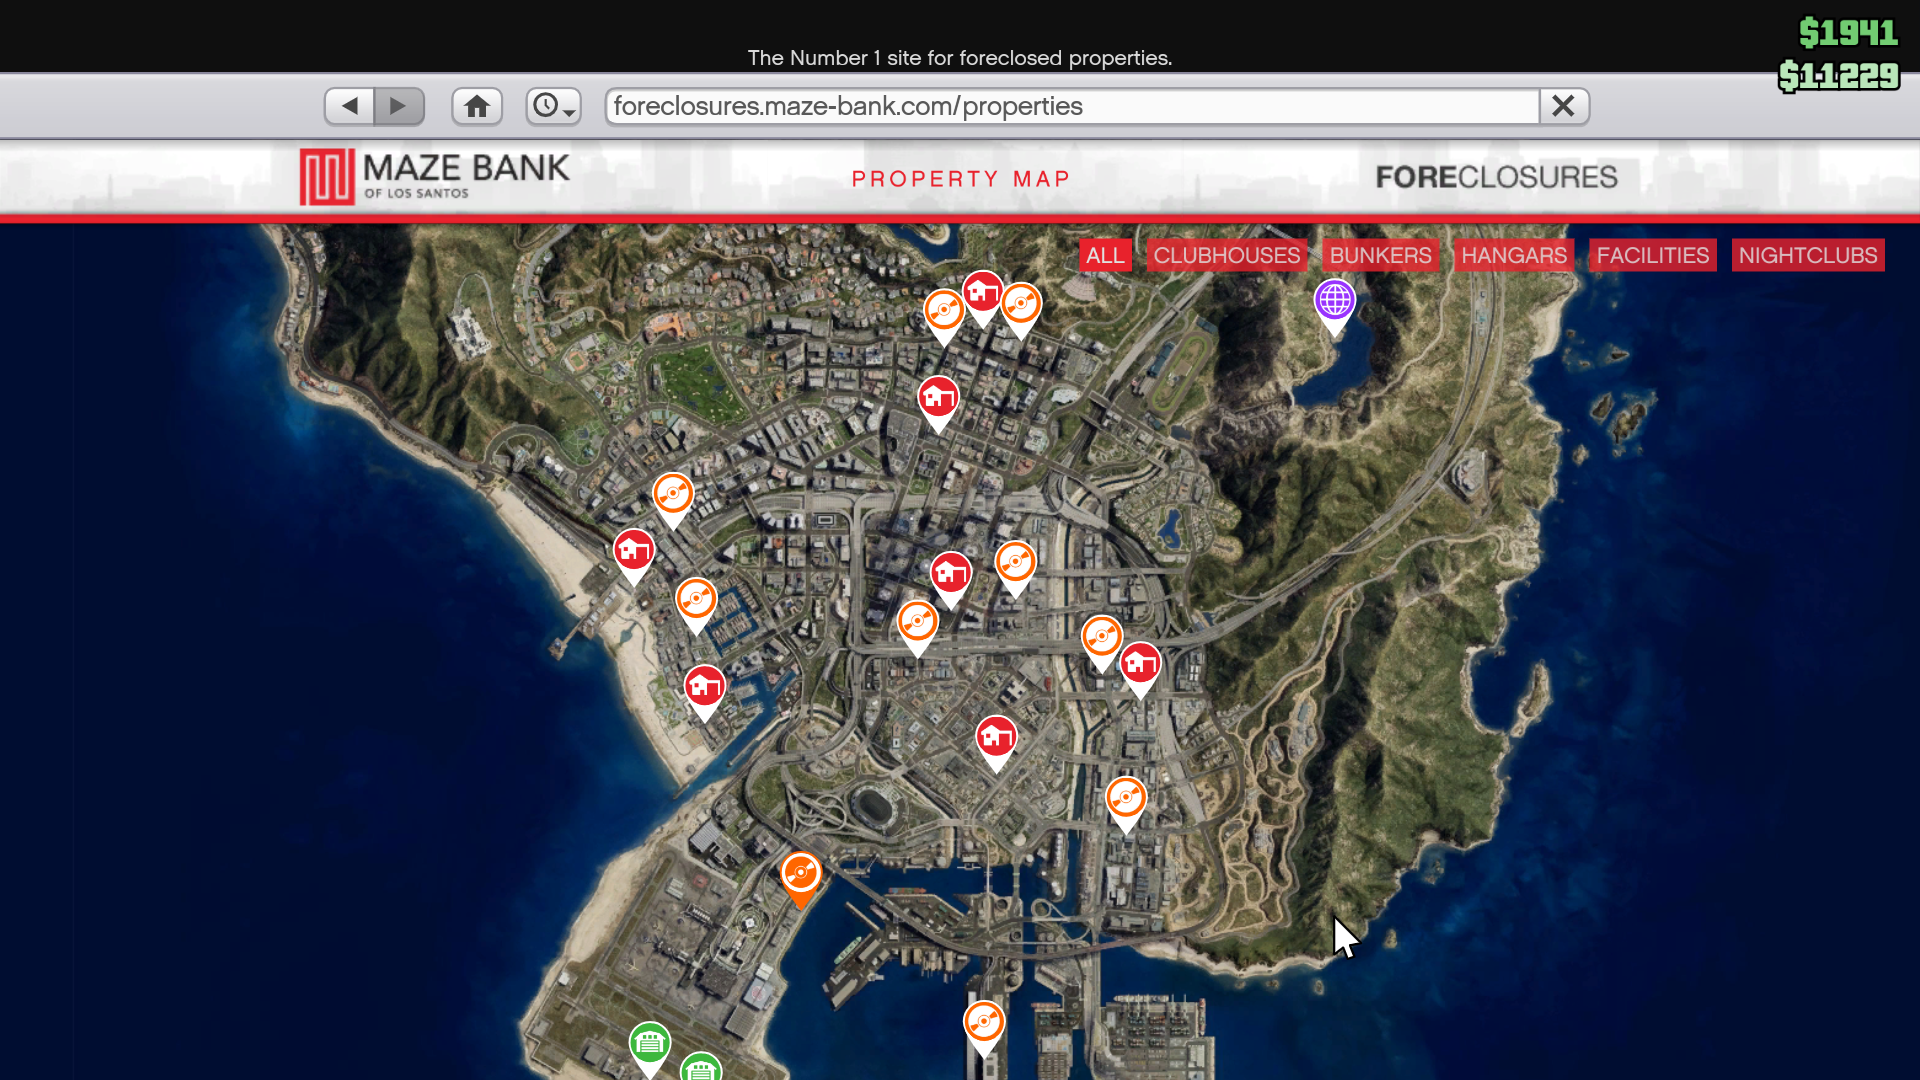 grand theft auto 5 map locations